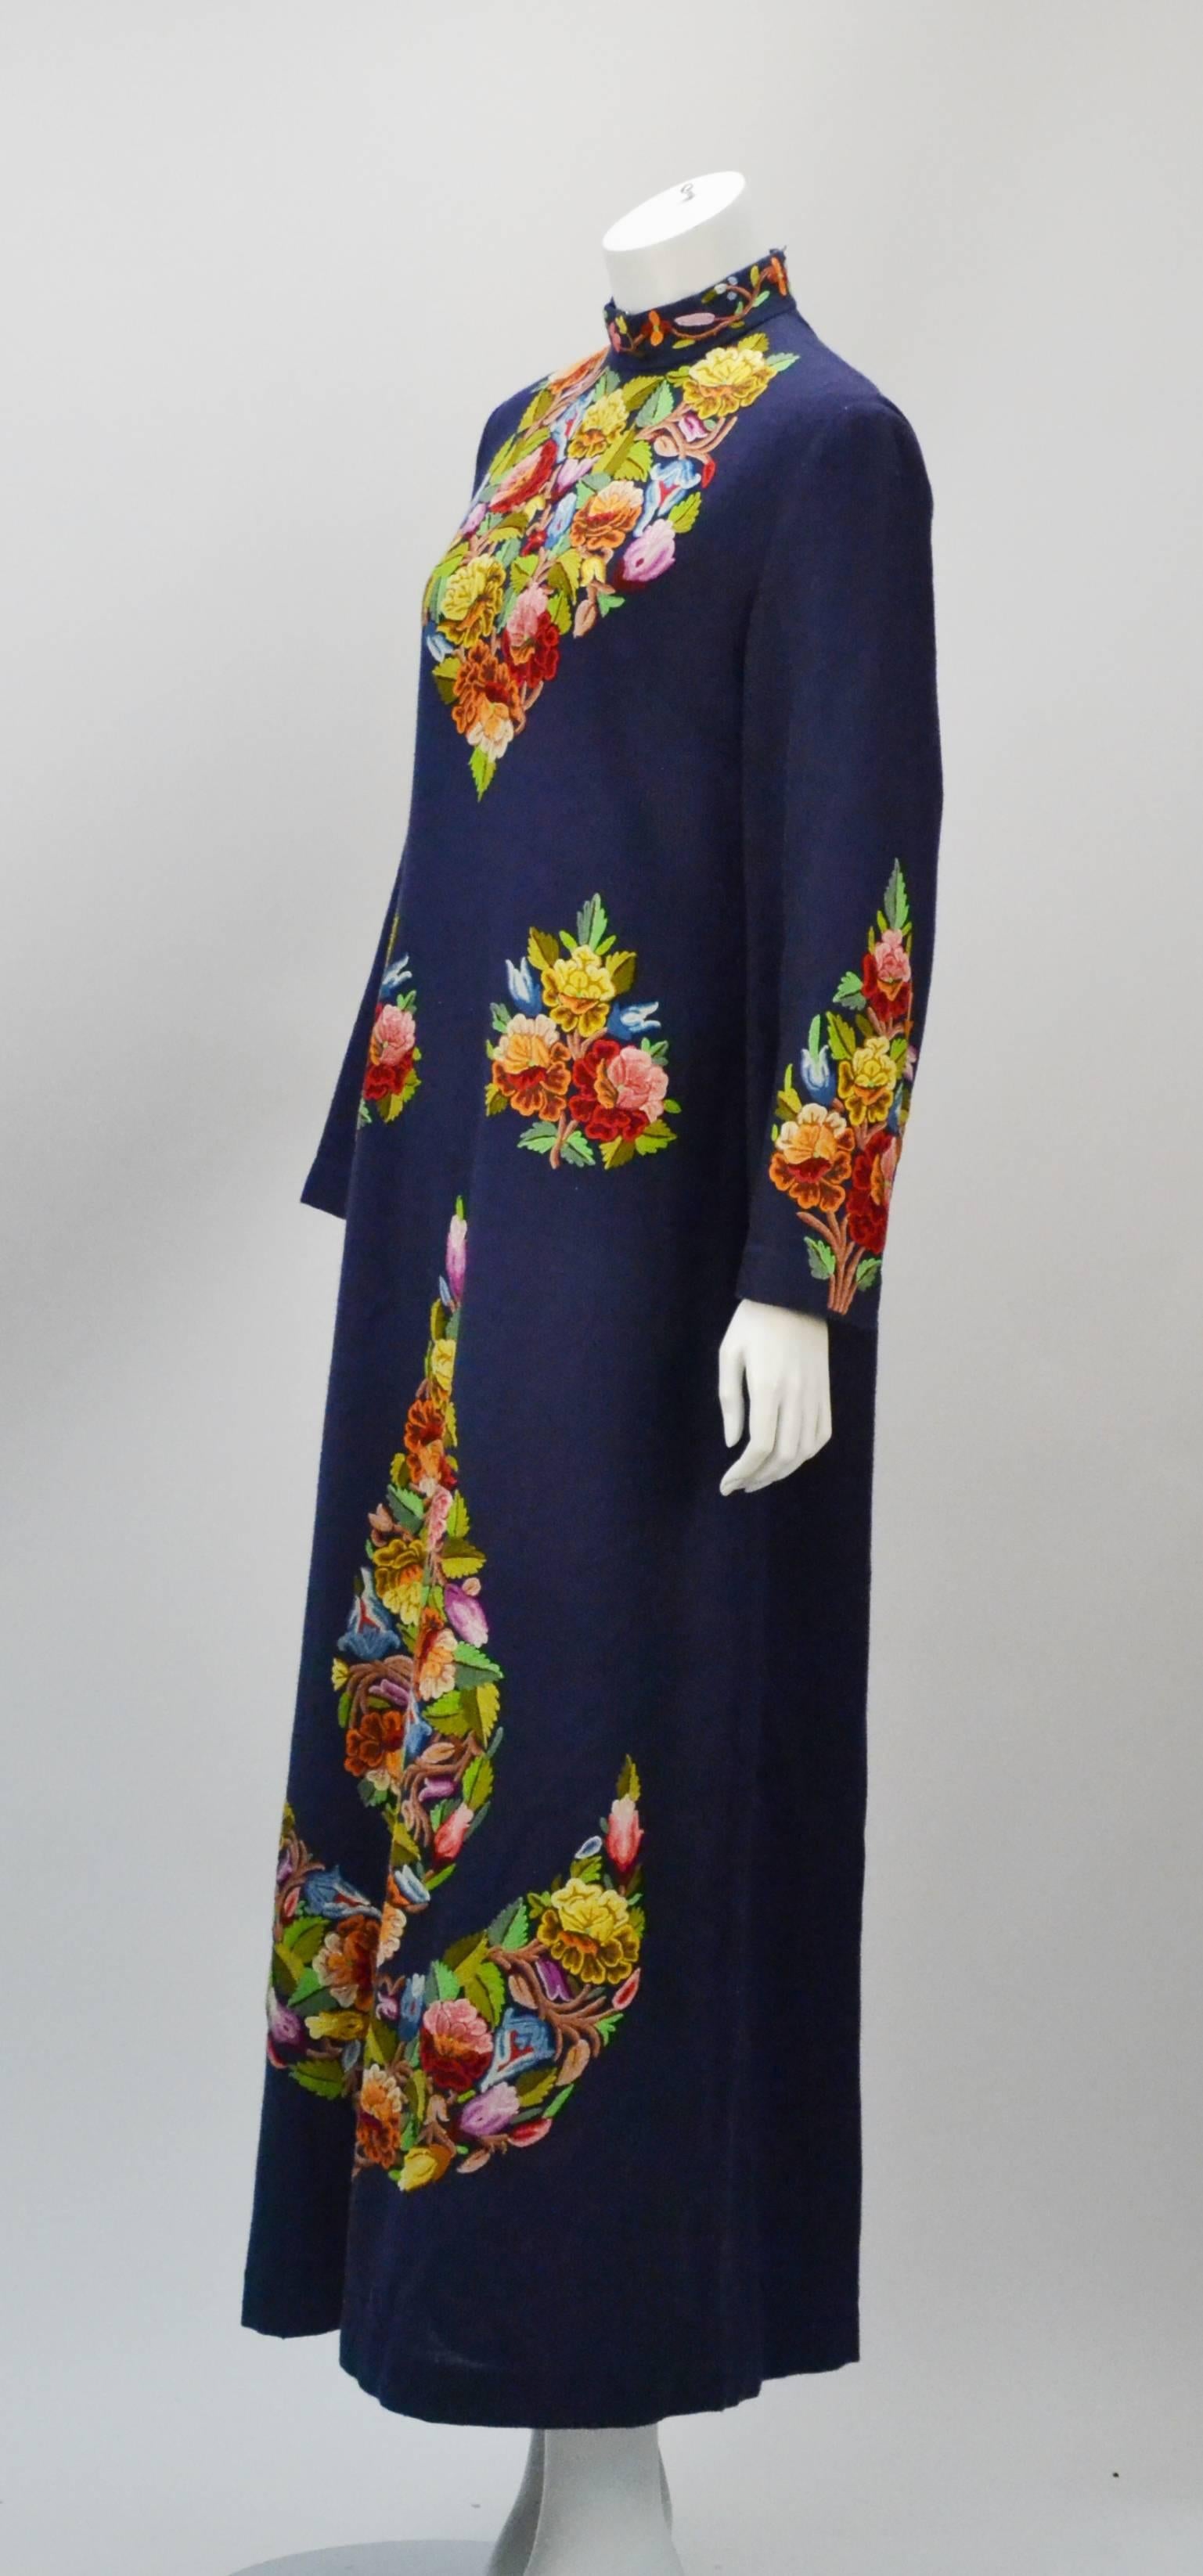 Wonderful long navy blue kaftan/shift dress with long sleeves. It features a standing collar and impeccable multi color embroidered floral scene. Dress is made of wool and lined with what appears to be a natural fibered silk and cotton blend.  Metal